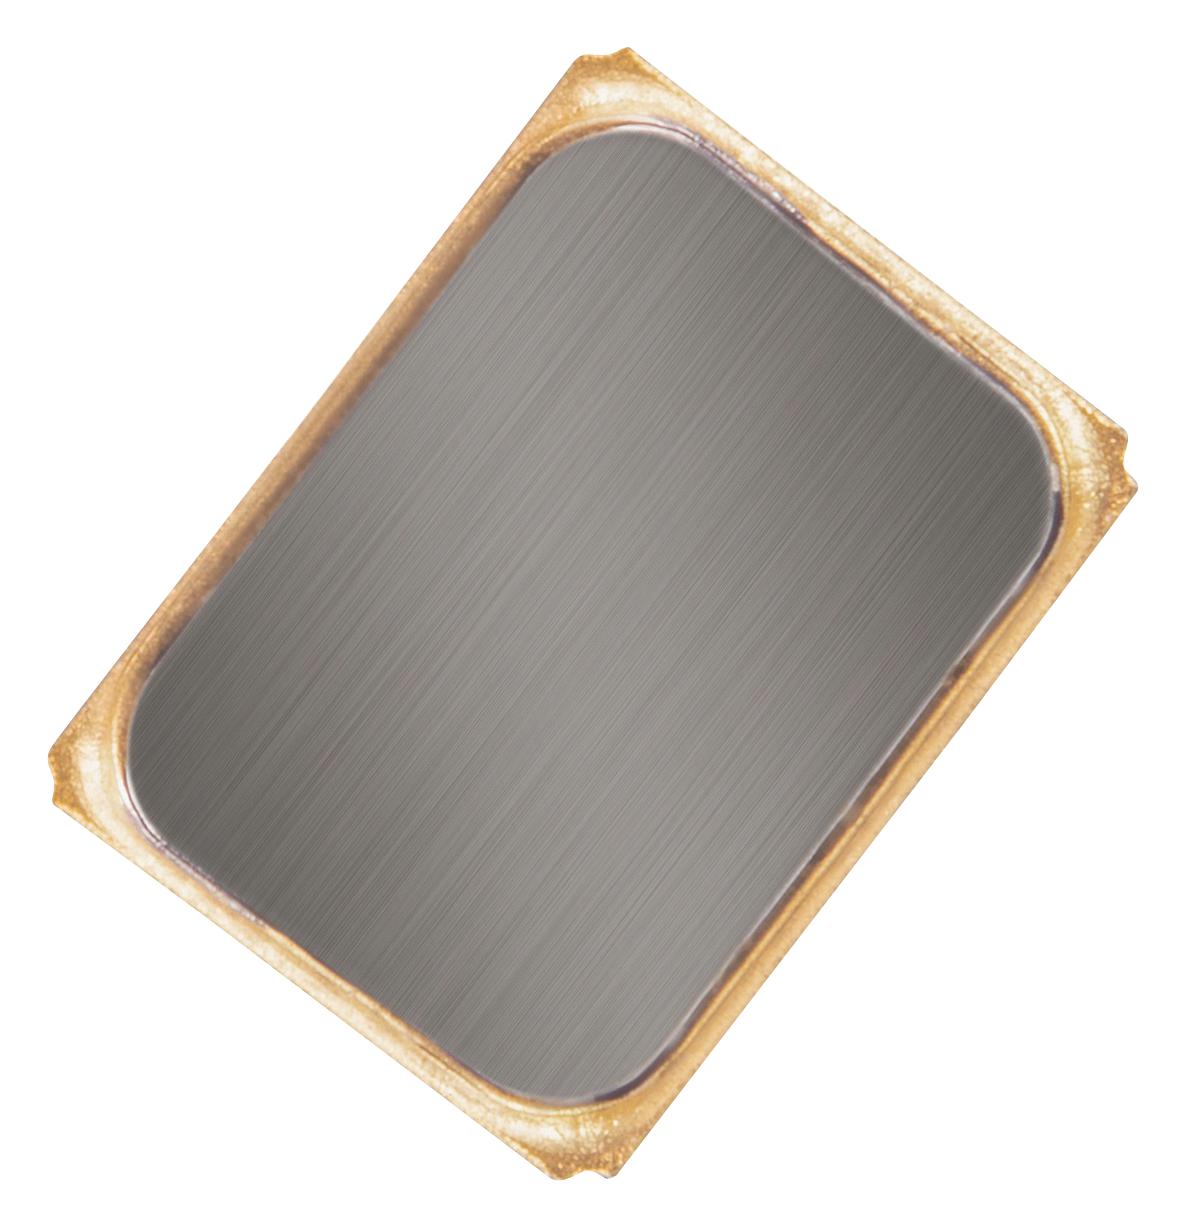 Raltron R2016-32.000-12-F-1010-Ext-Tr Crystal, 32Mhz, 12Pf, Smd, 2mm X 1.6mm